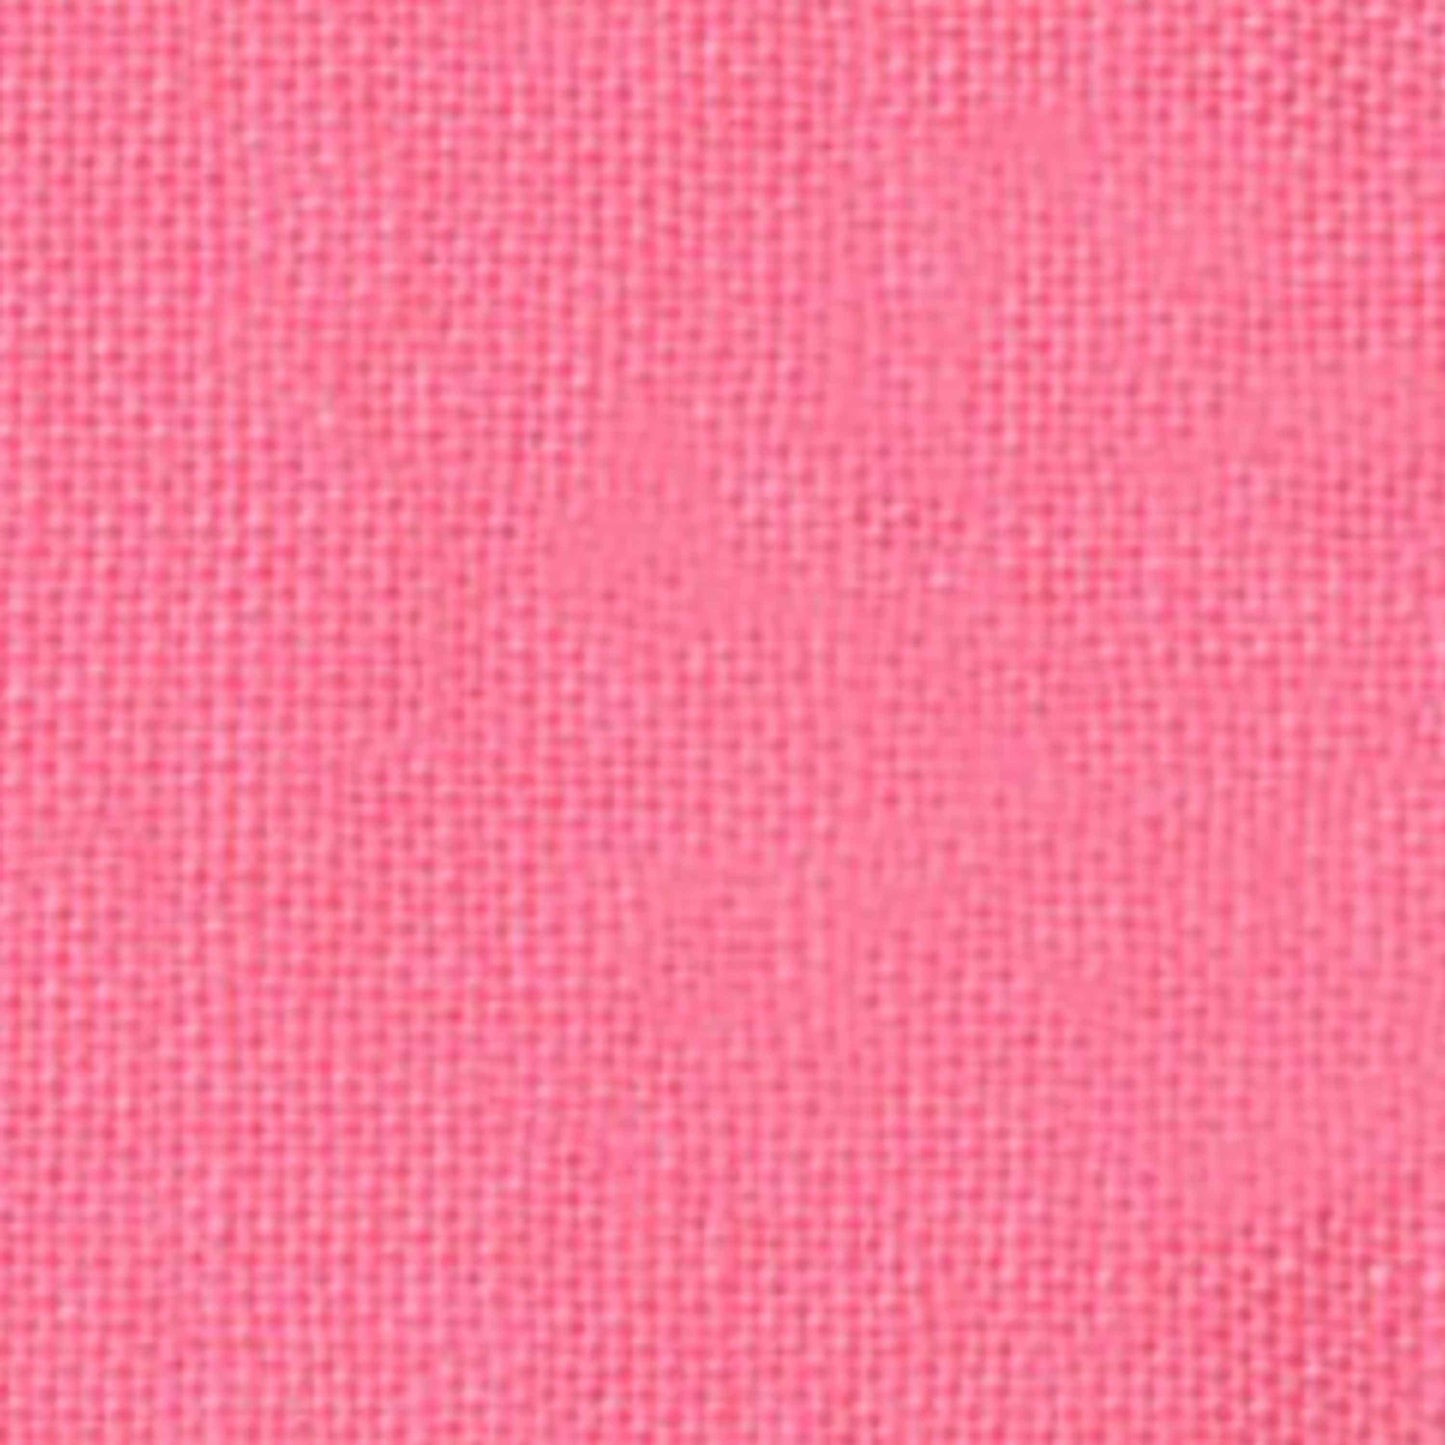 Fabric By The Yard - Bubblegum Pink Cotton Couture Fabric - SC5333-BUBB